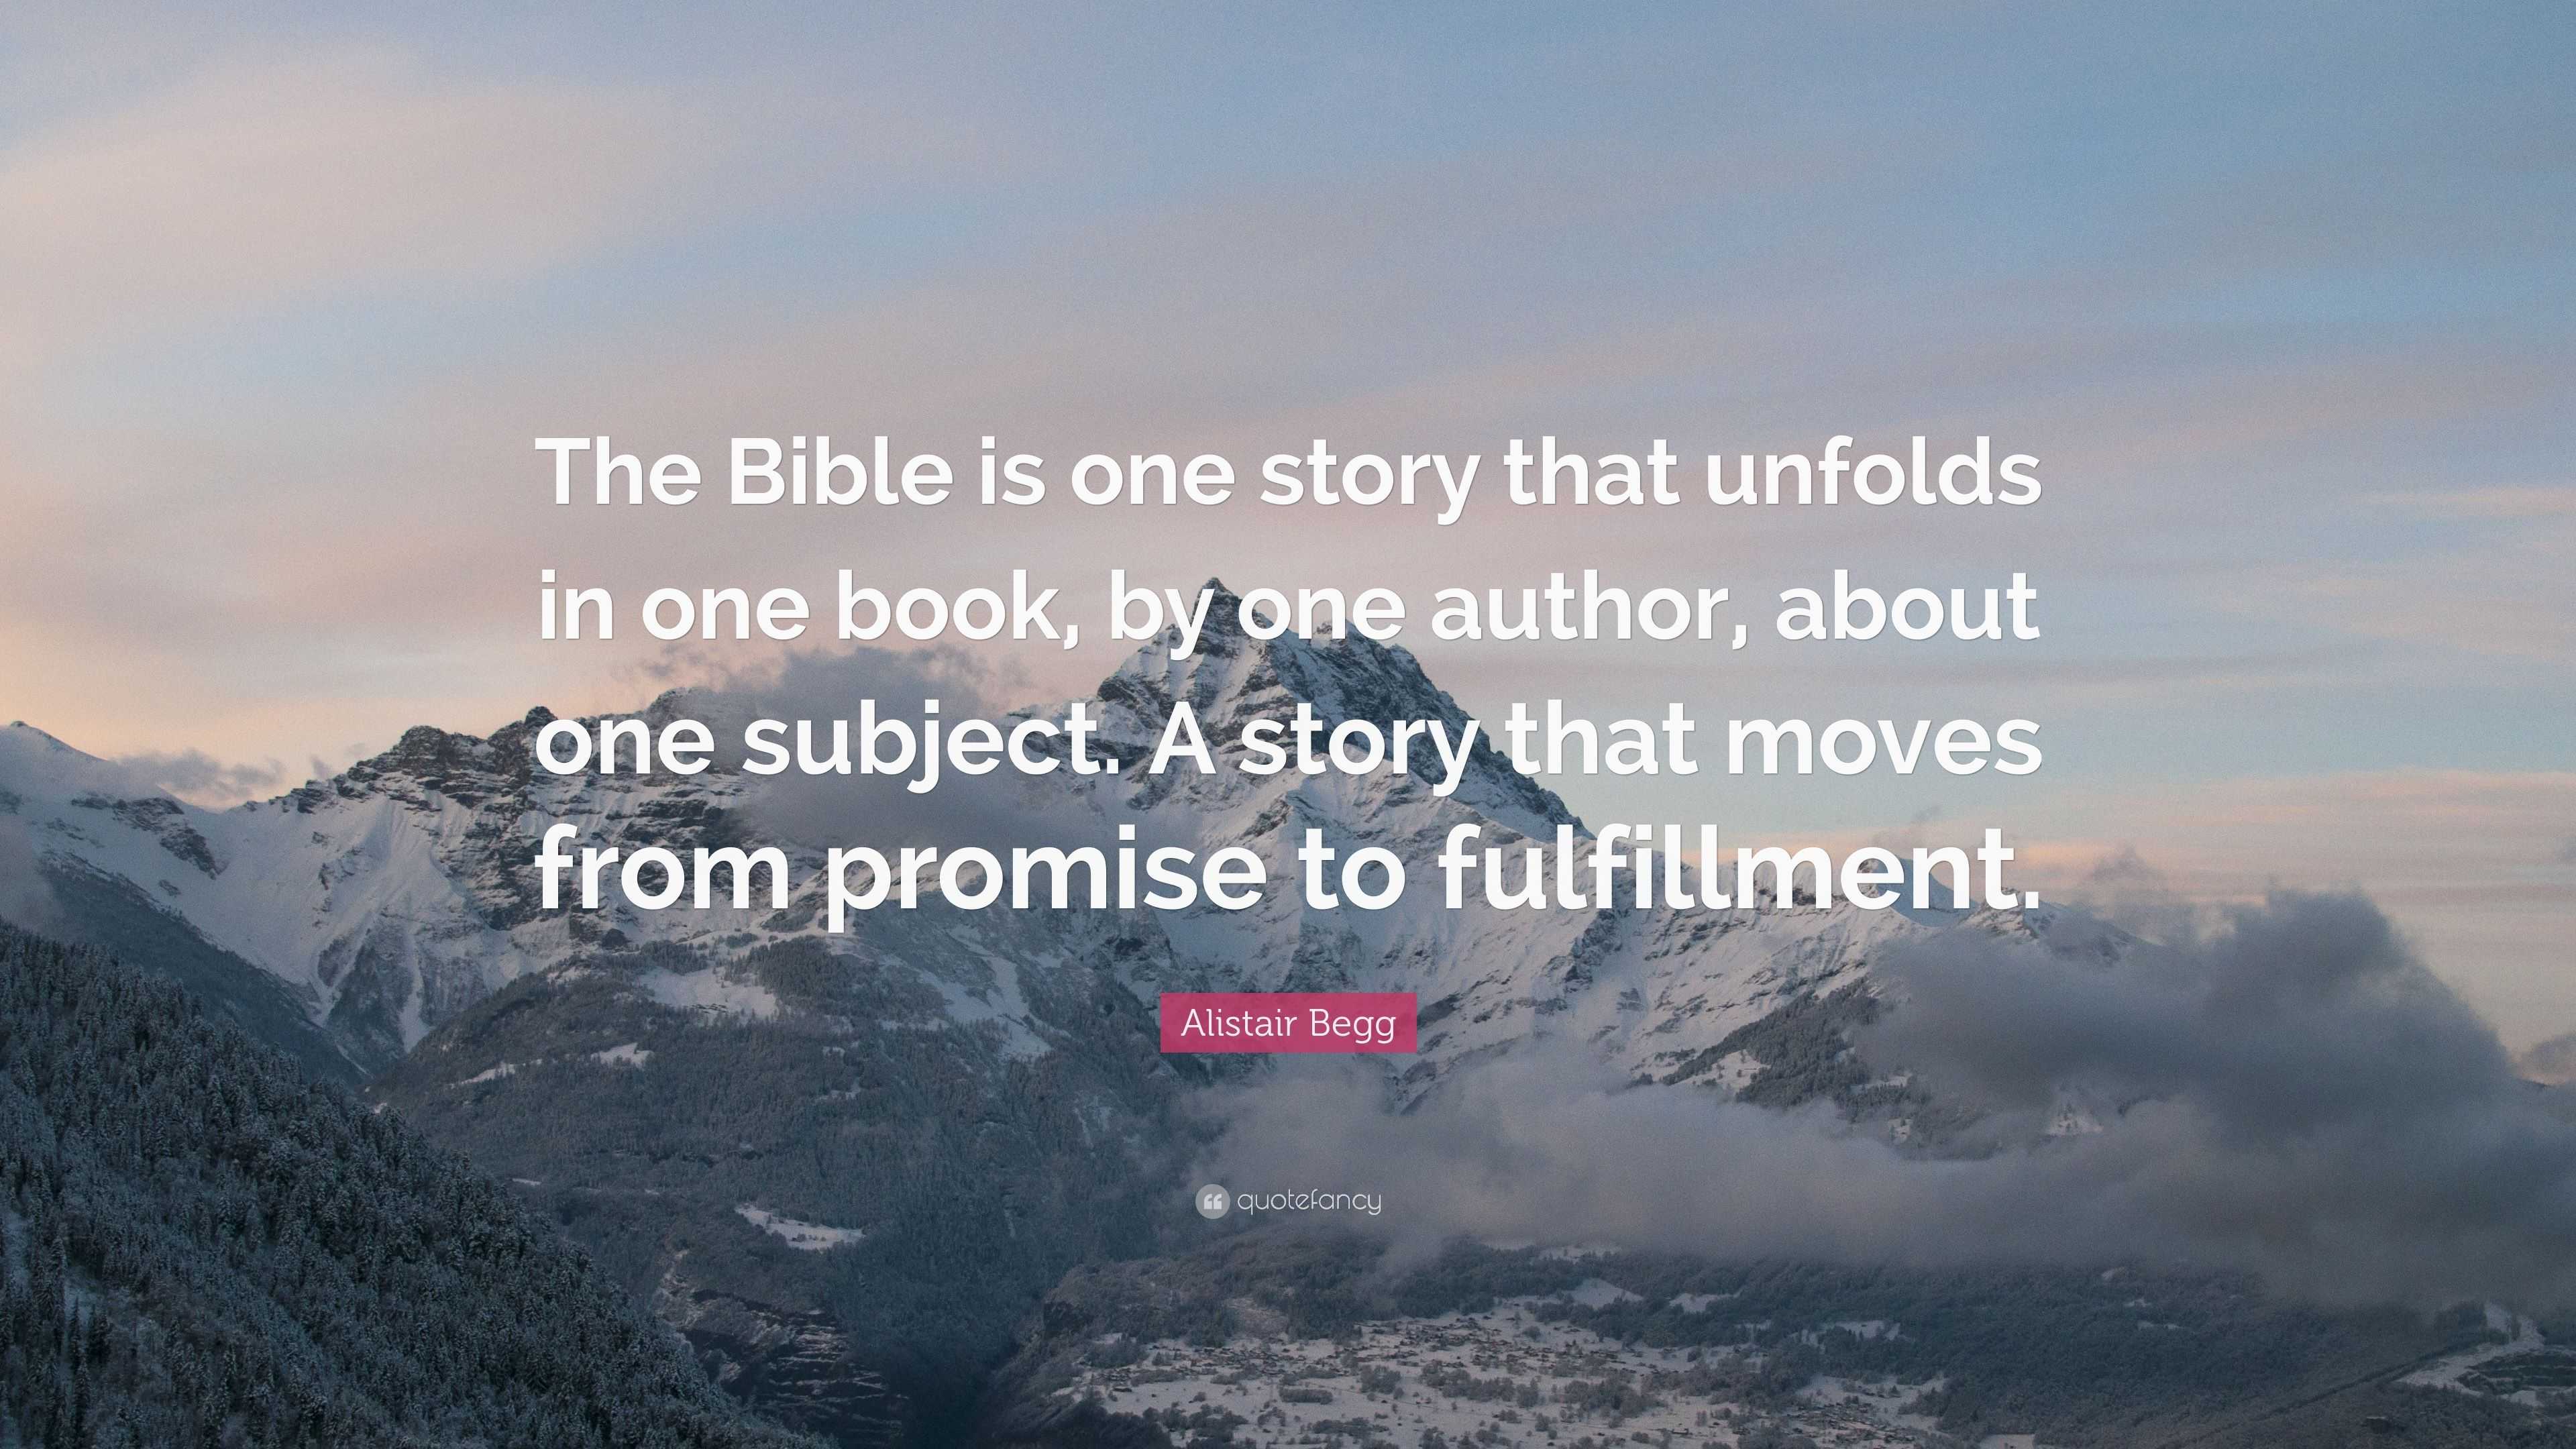 Alistair Begg Quote: “The Bible is one story that unfolds in one book ...